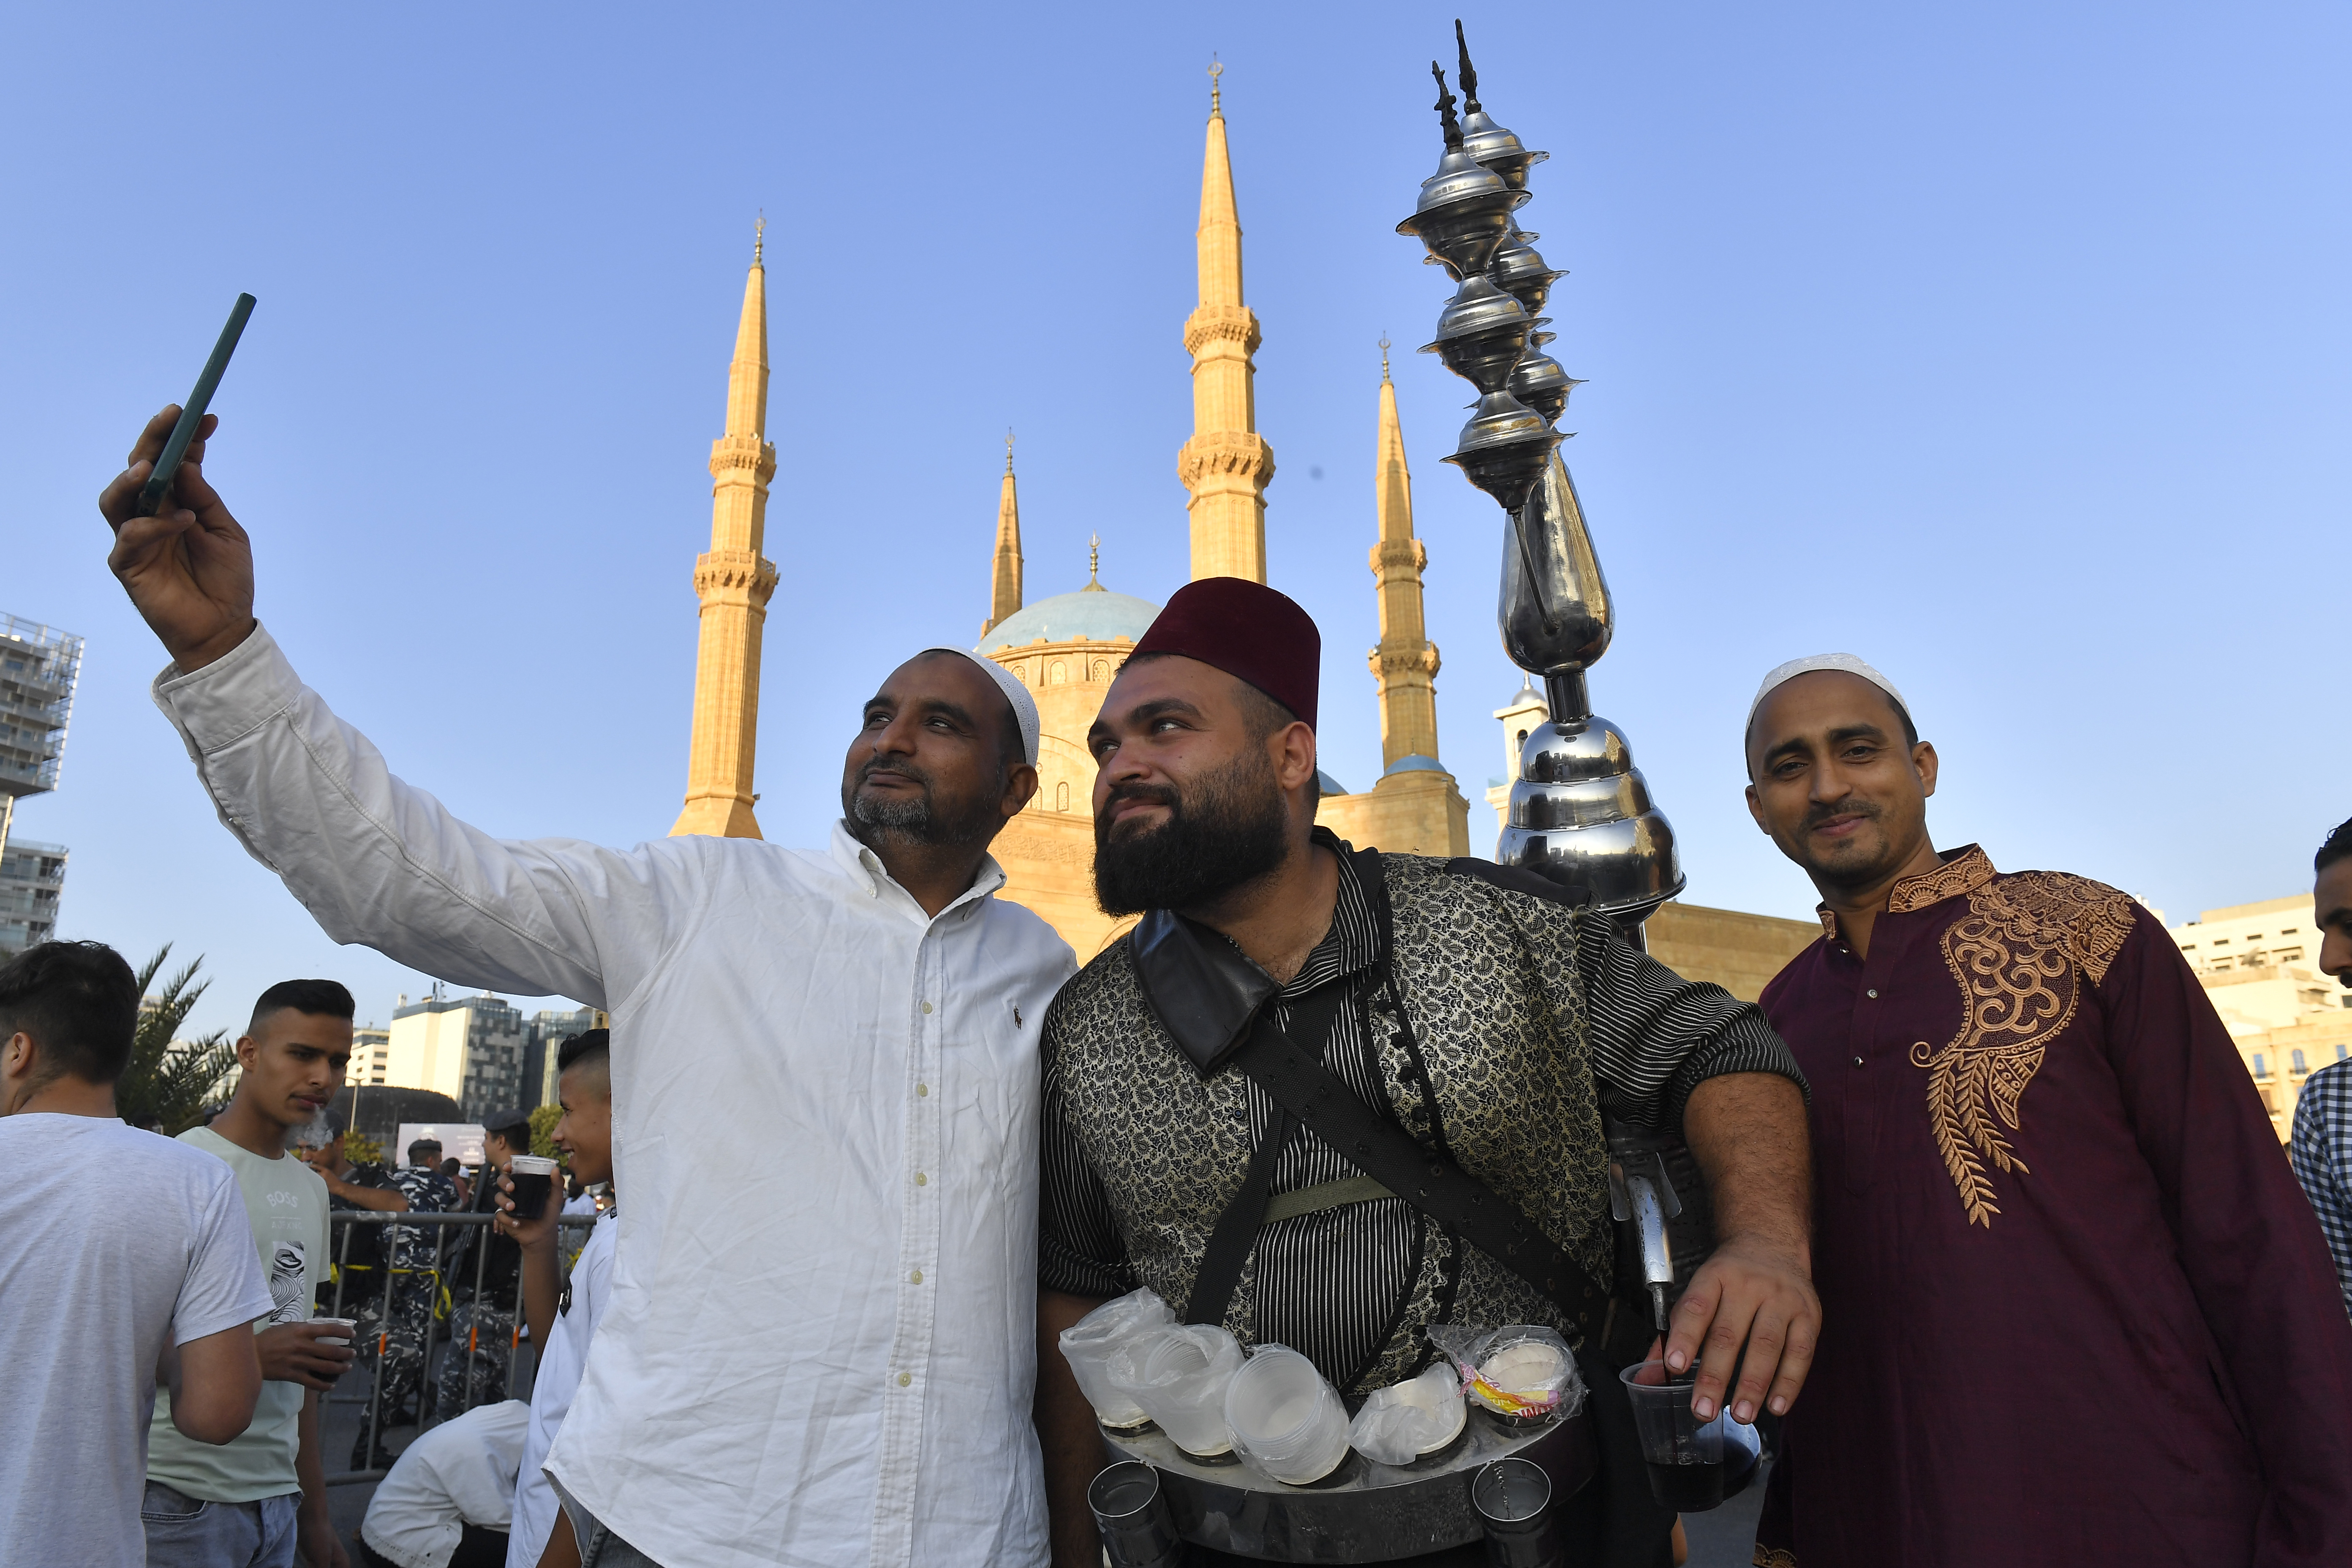 Muslims arrive at the Mohammad Al-Amin Mosque to perform Eid al-Adha prayers in Beirut, Lebanon.